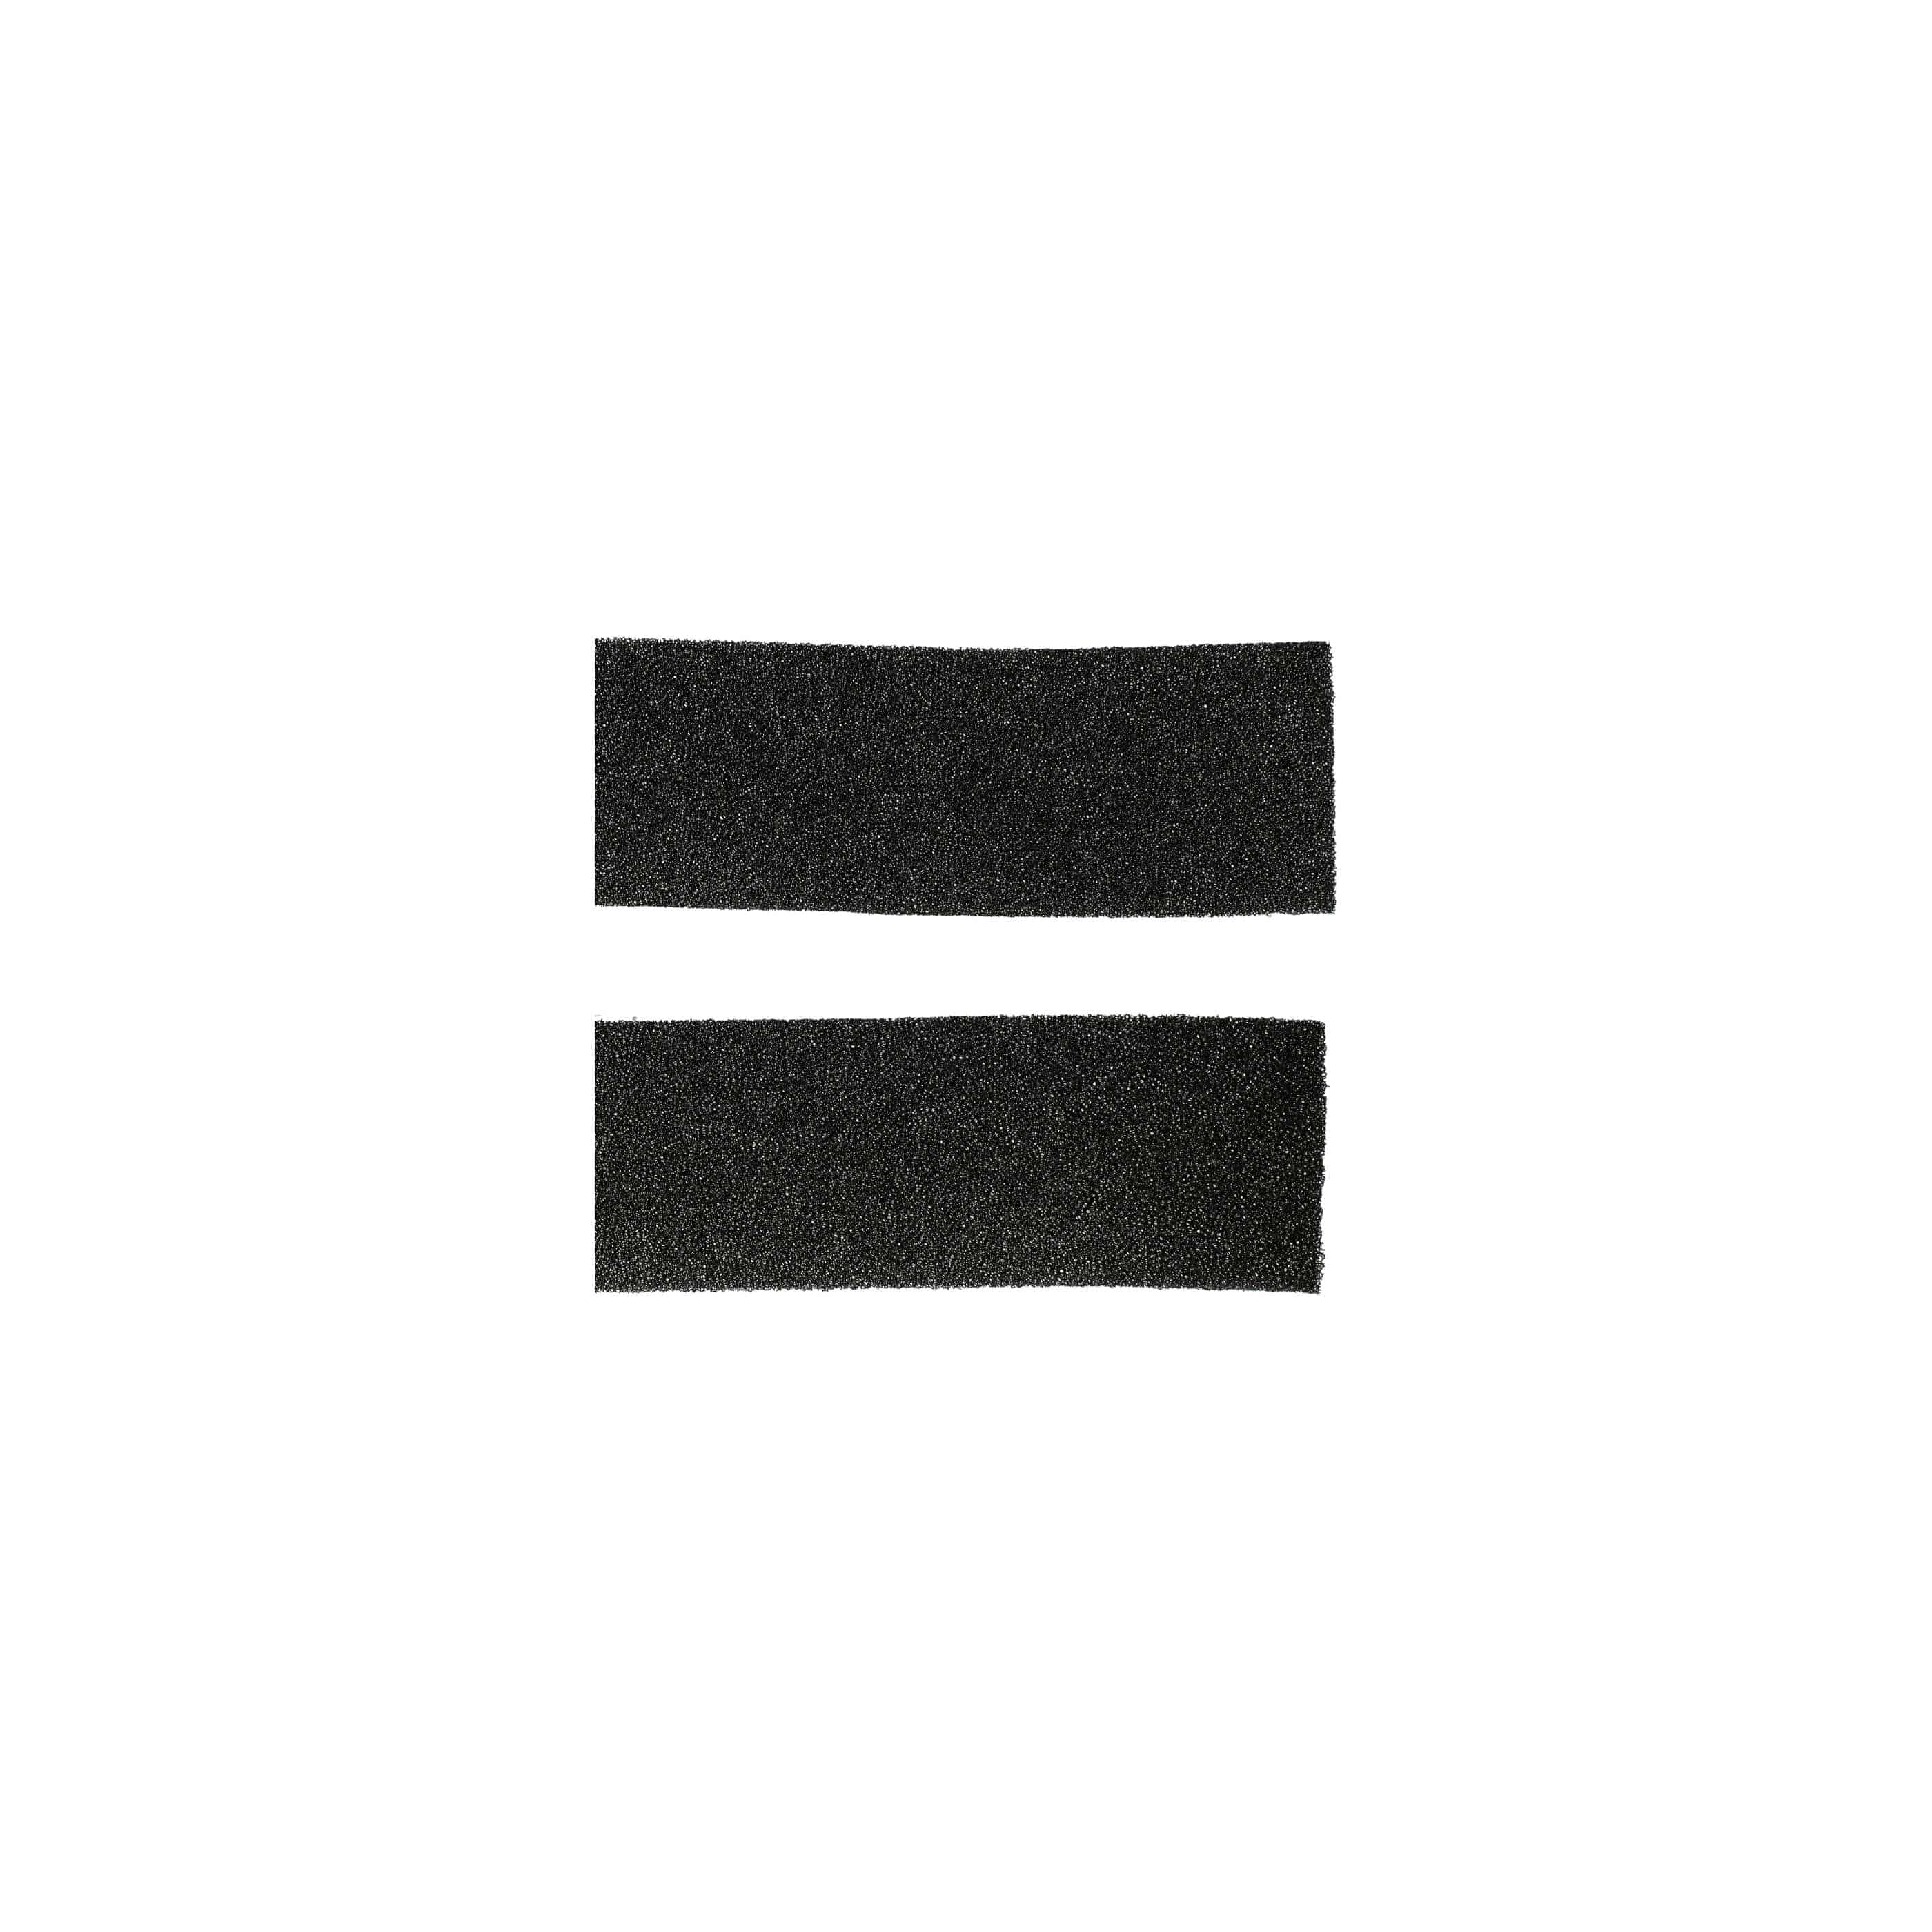 4x Filter for Filling Ring as Replacement for Miele 9688381, 9688380 Tumble Dryer